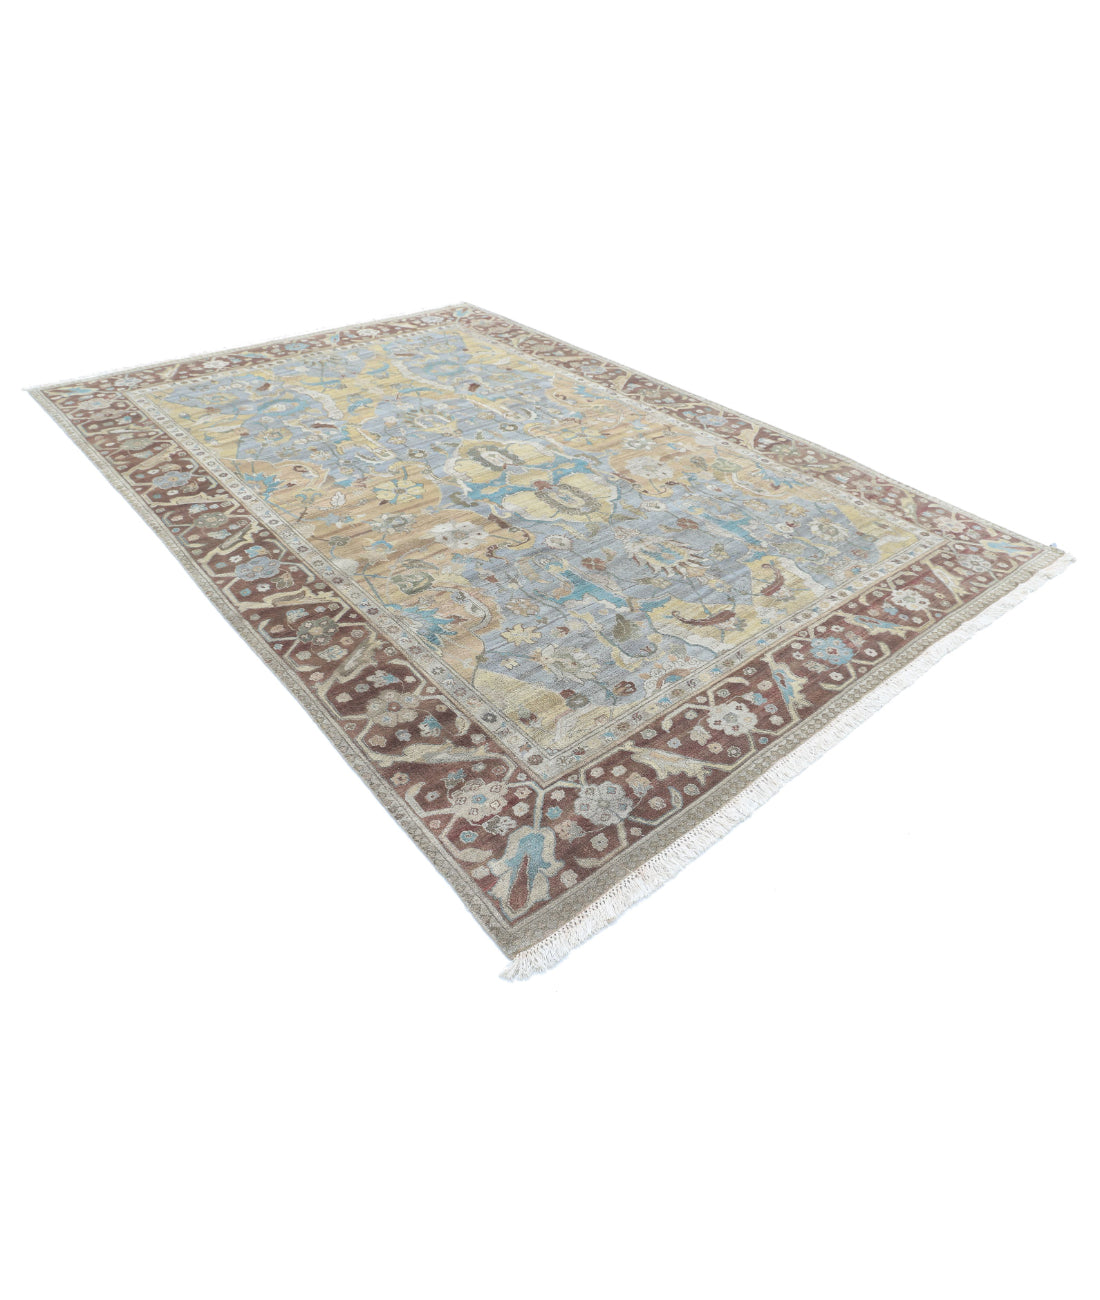 Hand Knotted Agra Polonaise Wool Rug - 8'1'' x 11'4'' 8'1'' x 11'4'' (268 X 363) / Grey / Brown